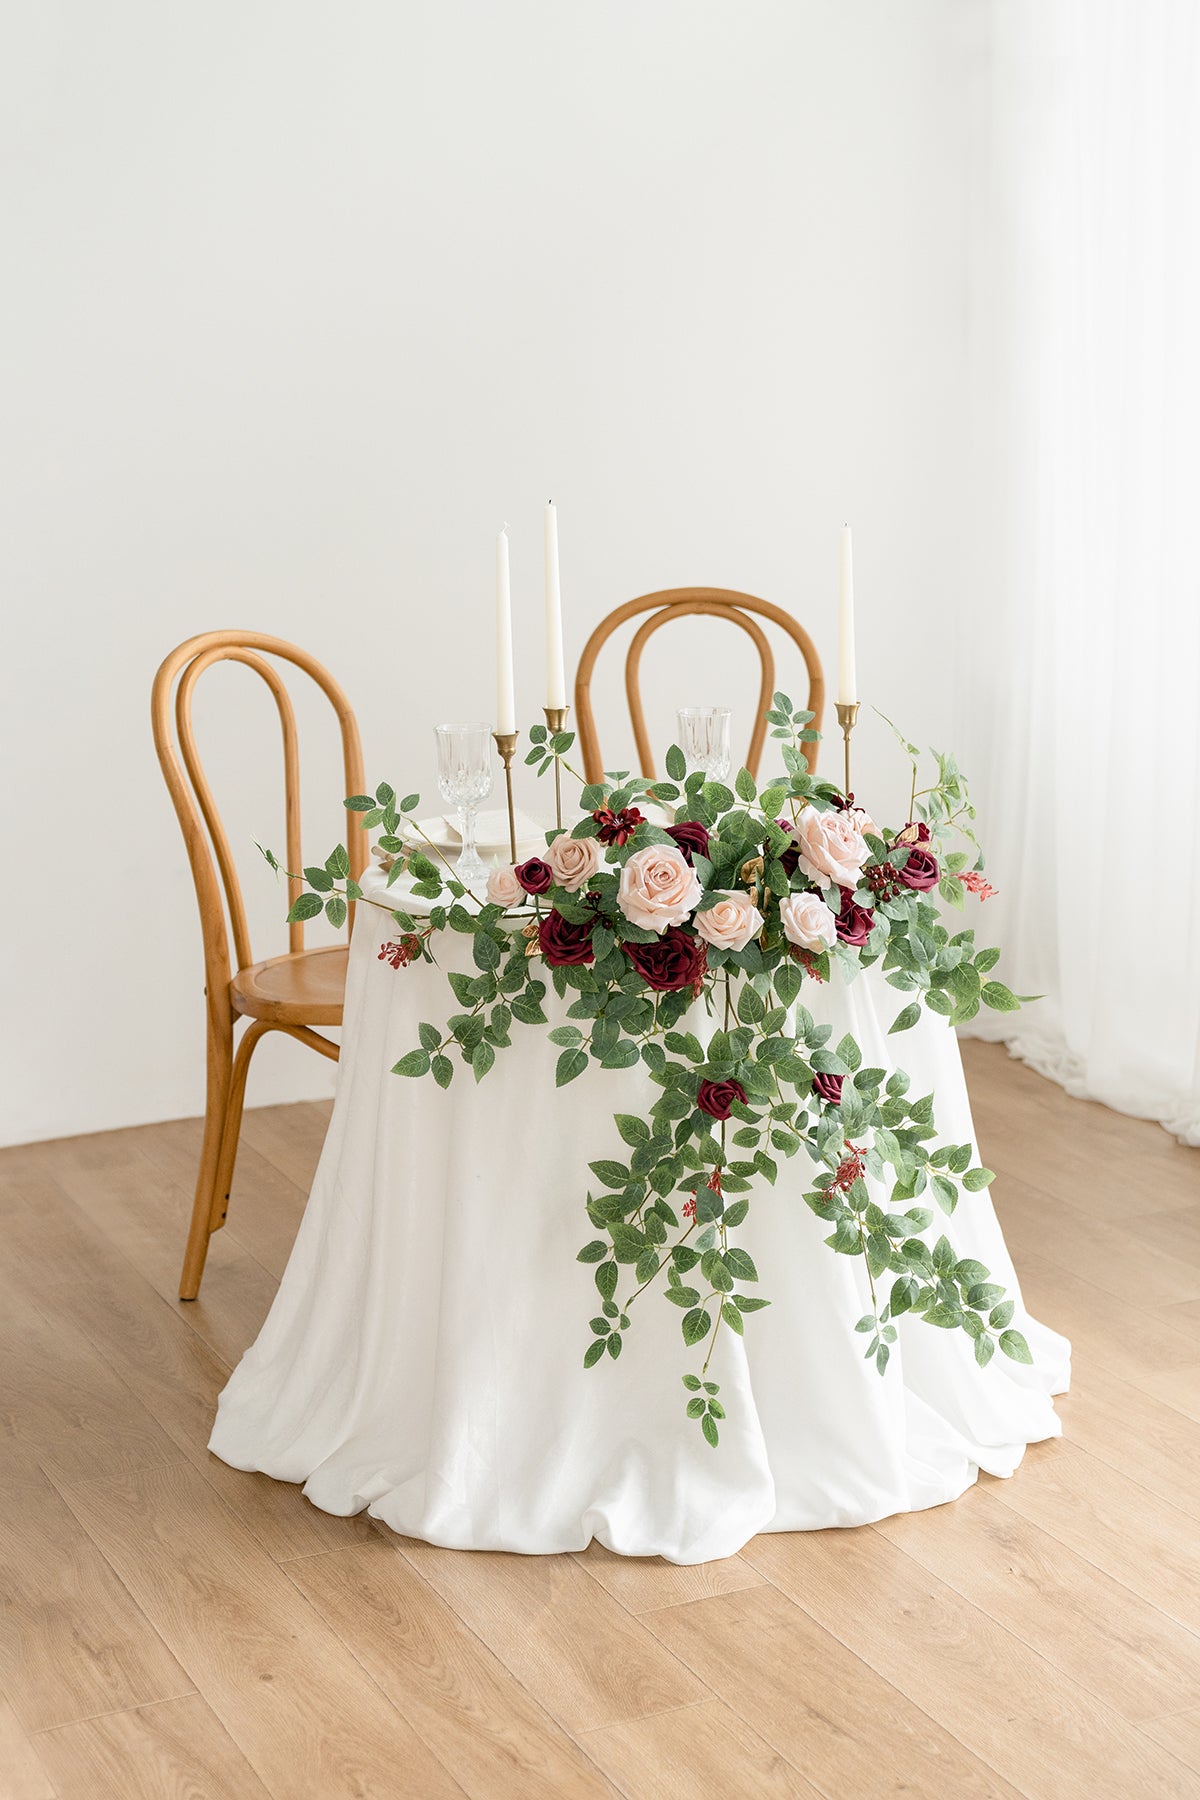 Sweetheart Table Floral Swags in Romantic Marsala